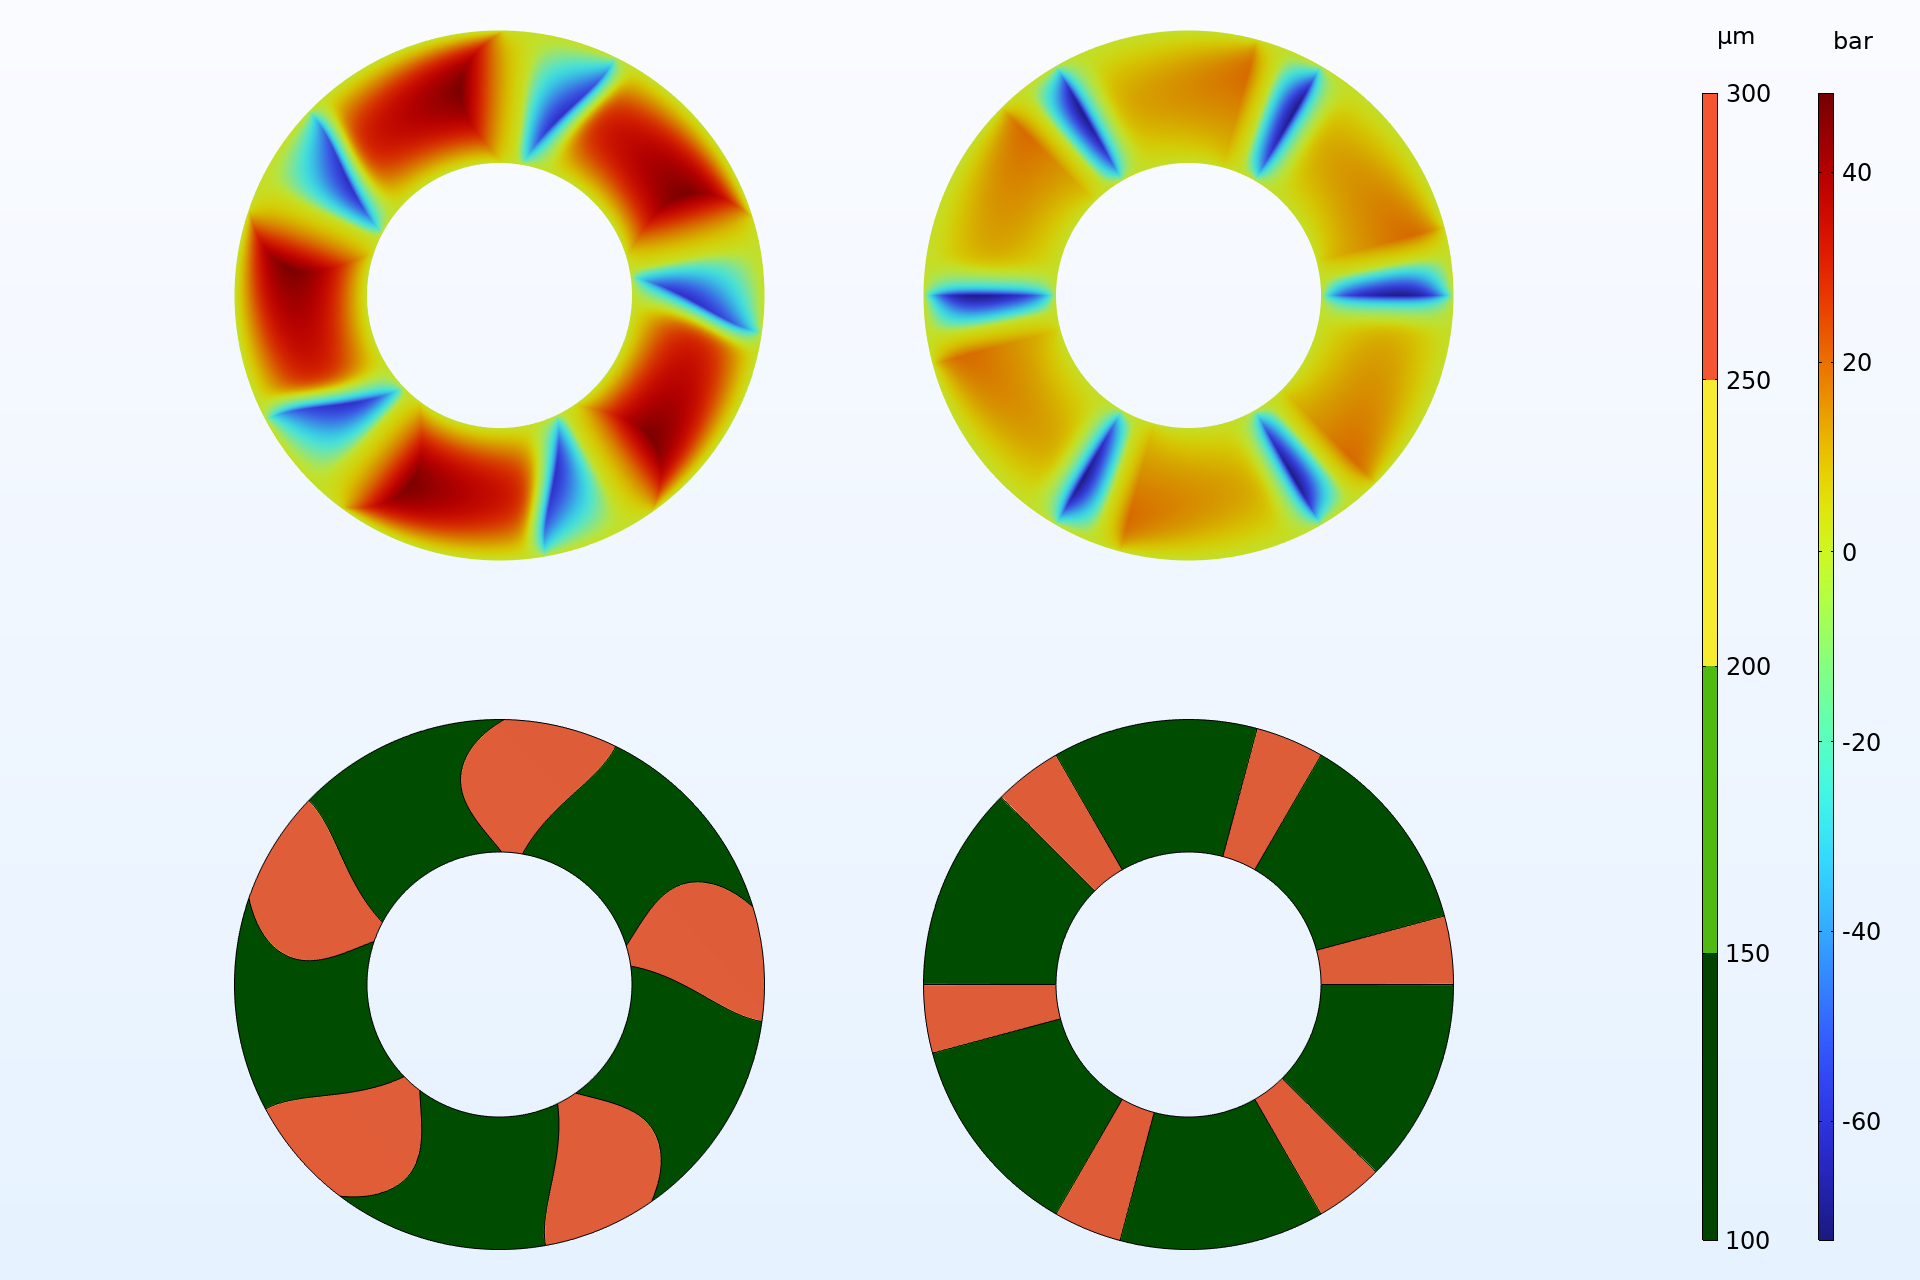 Four step thrust bearing models showing the optimized results on the left and the original results on the right.